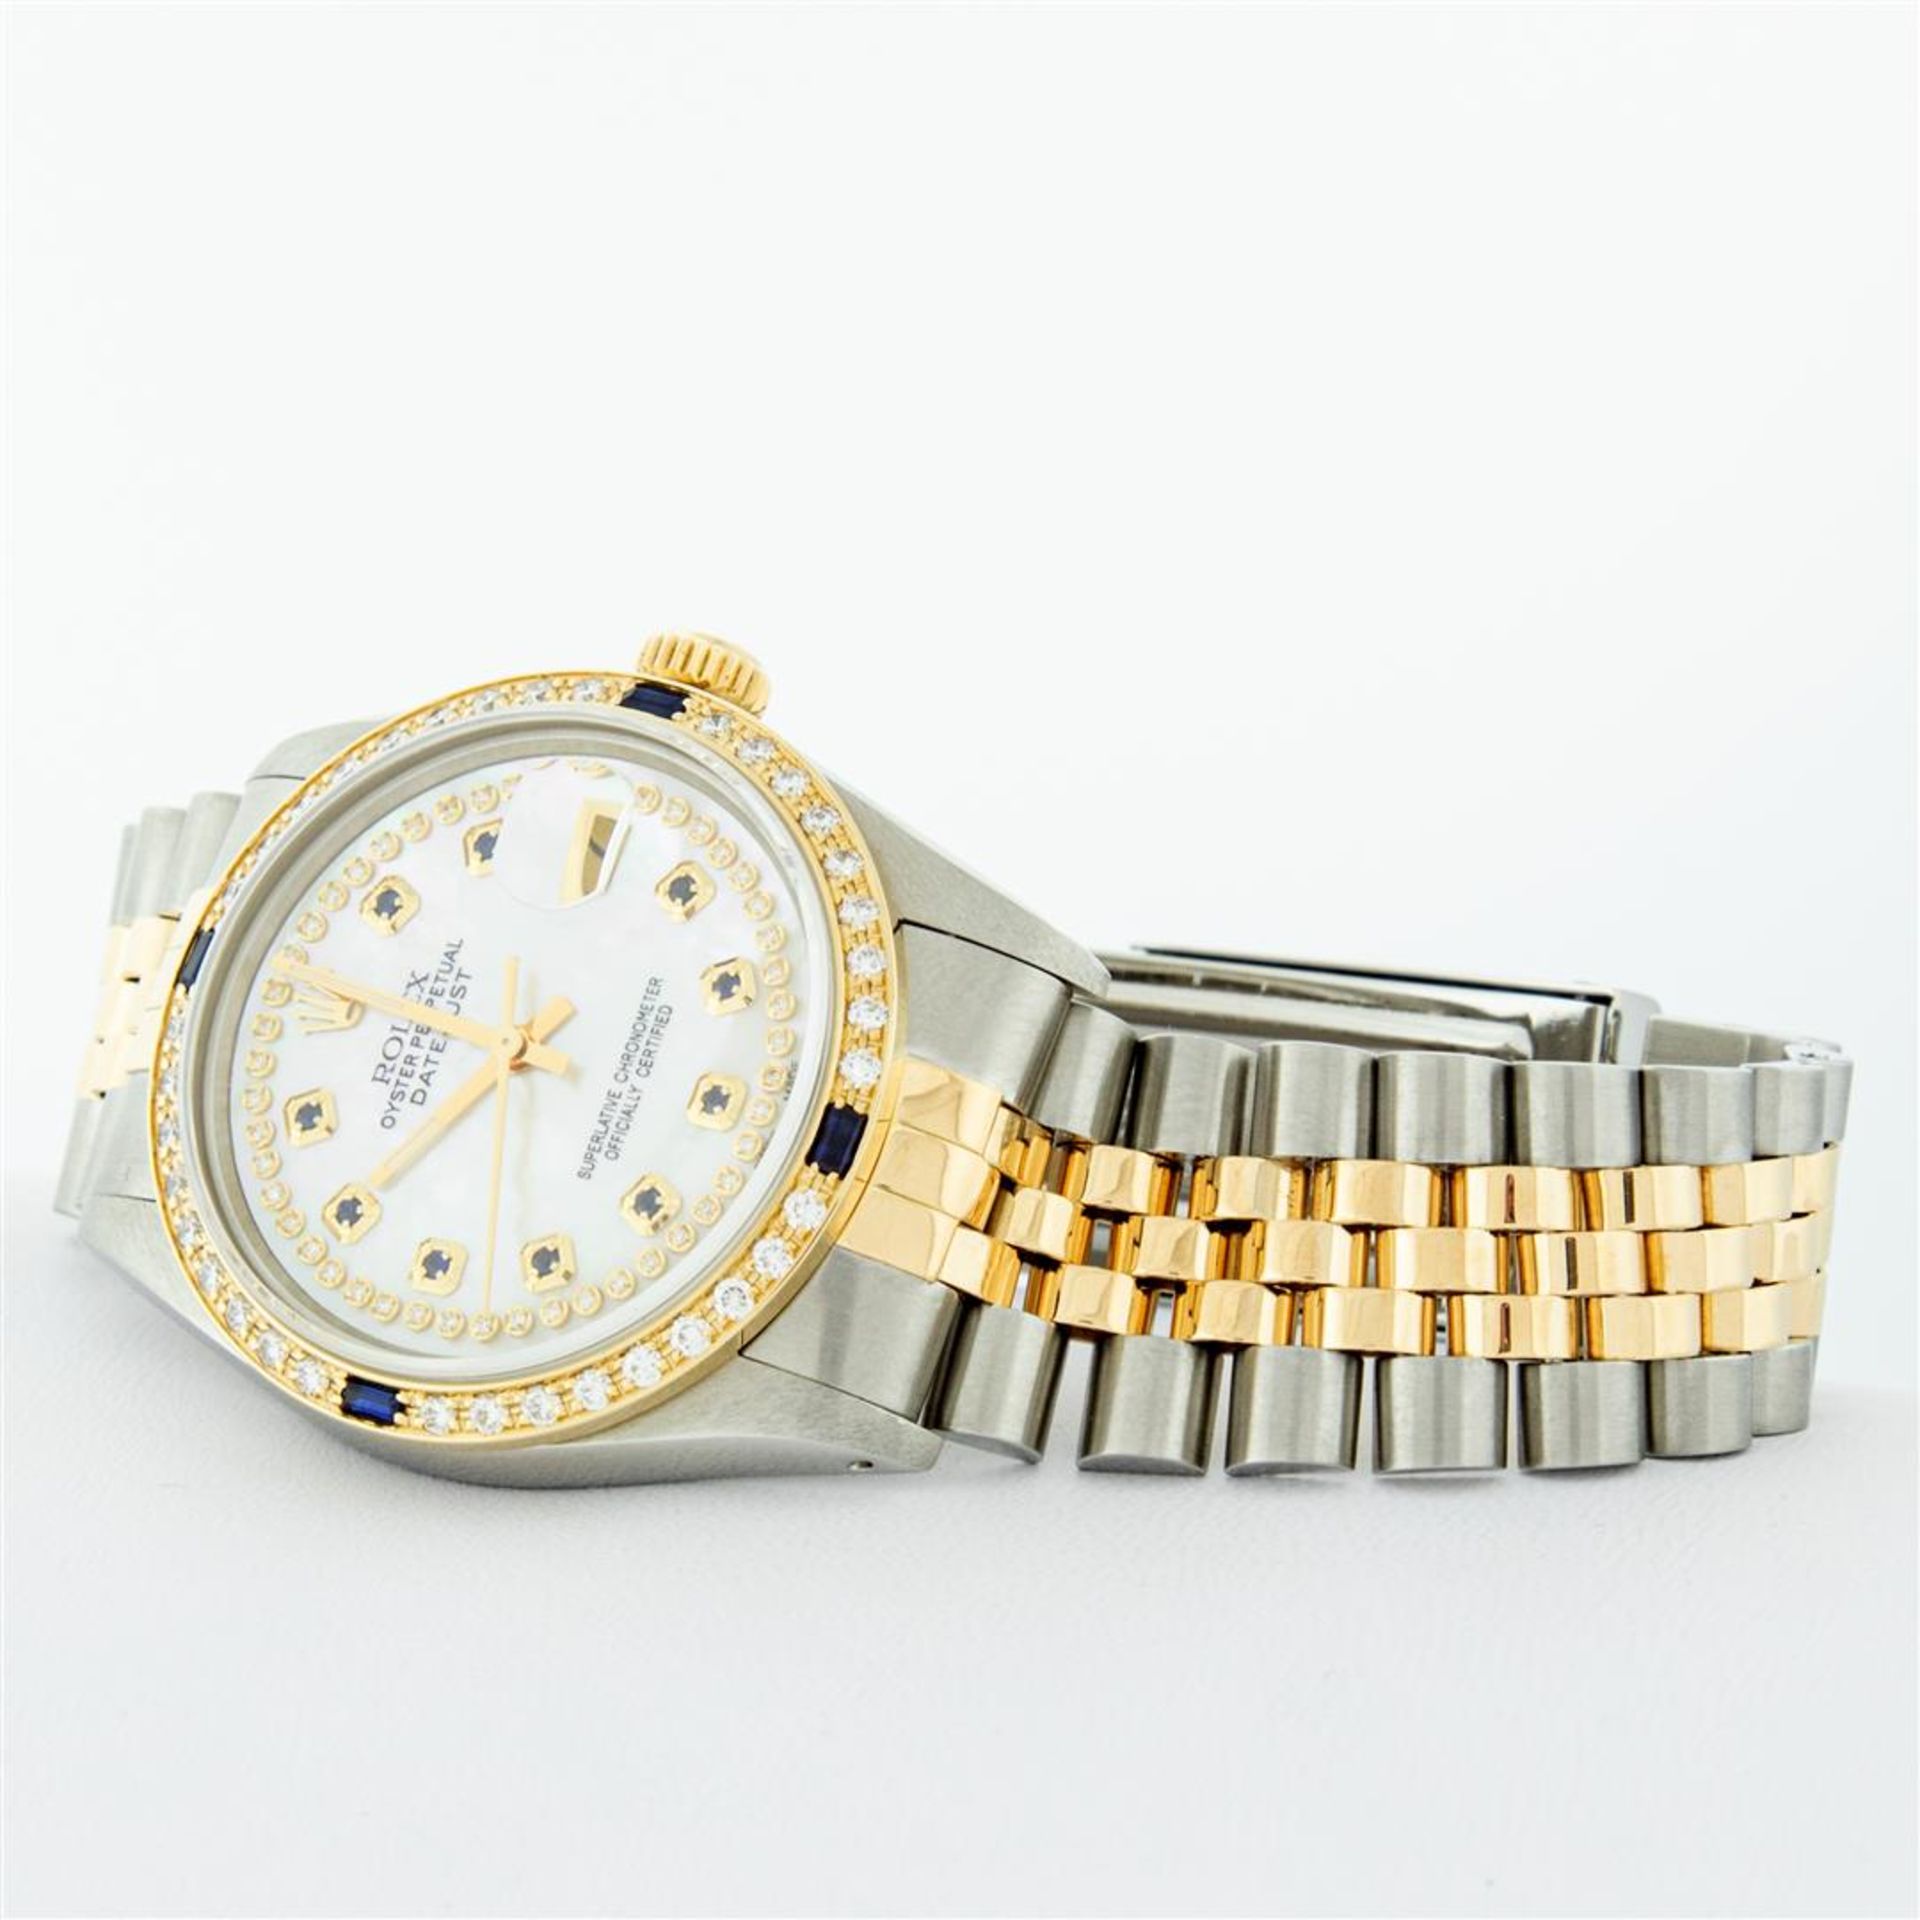 Rolex Mens 2 Tone Mother Of Pearl Diamond & Sapphire Datejust Wristwatch - Image 5 of 9